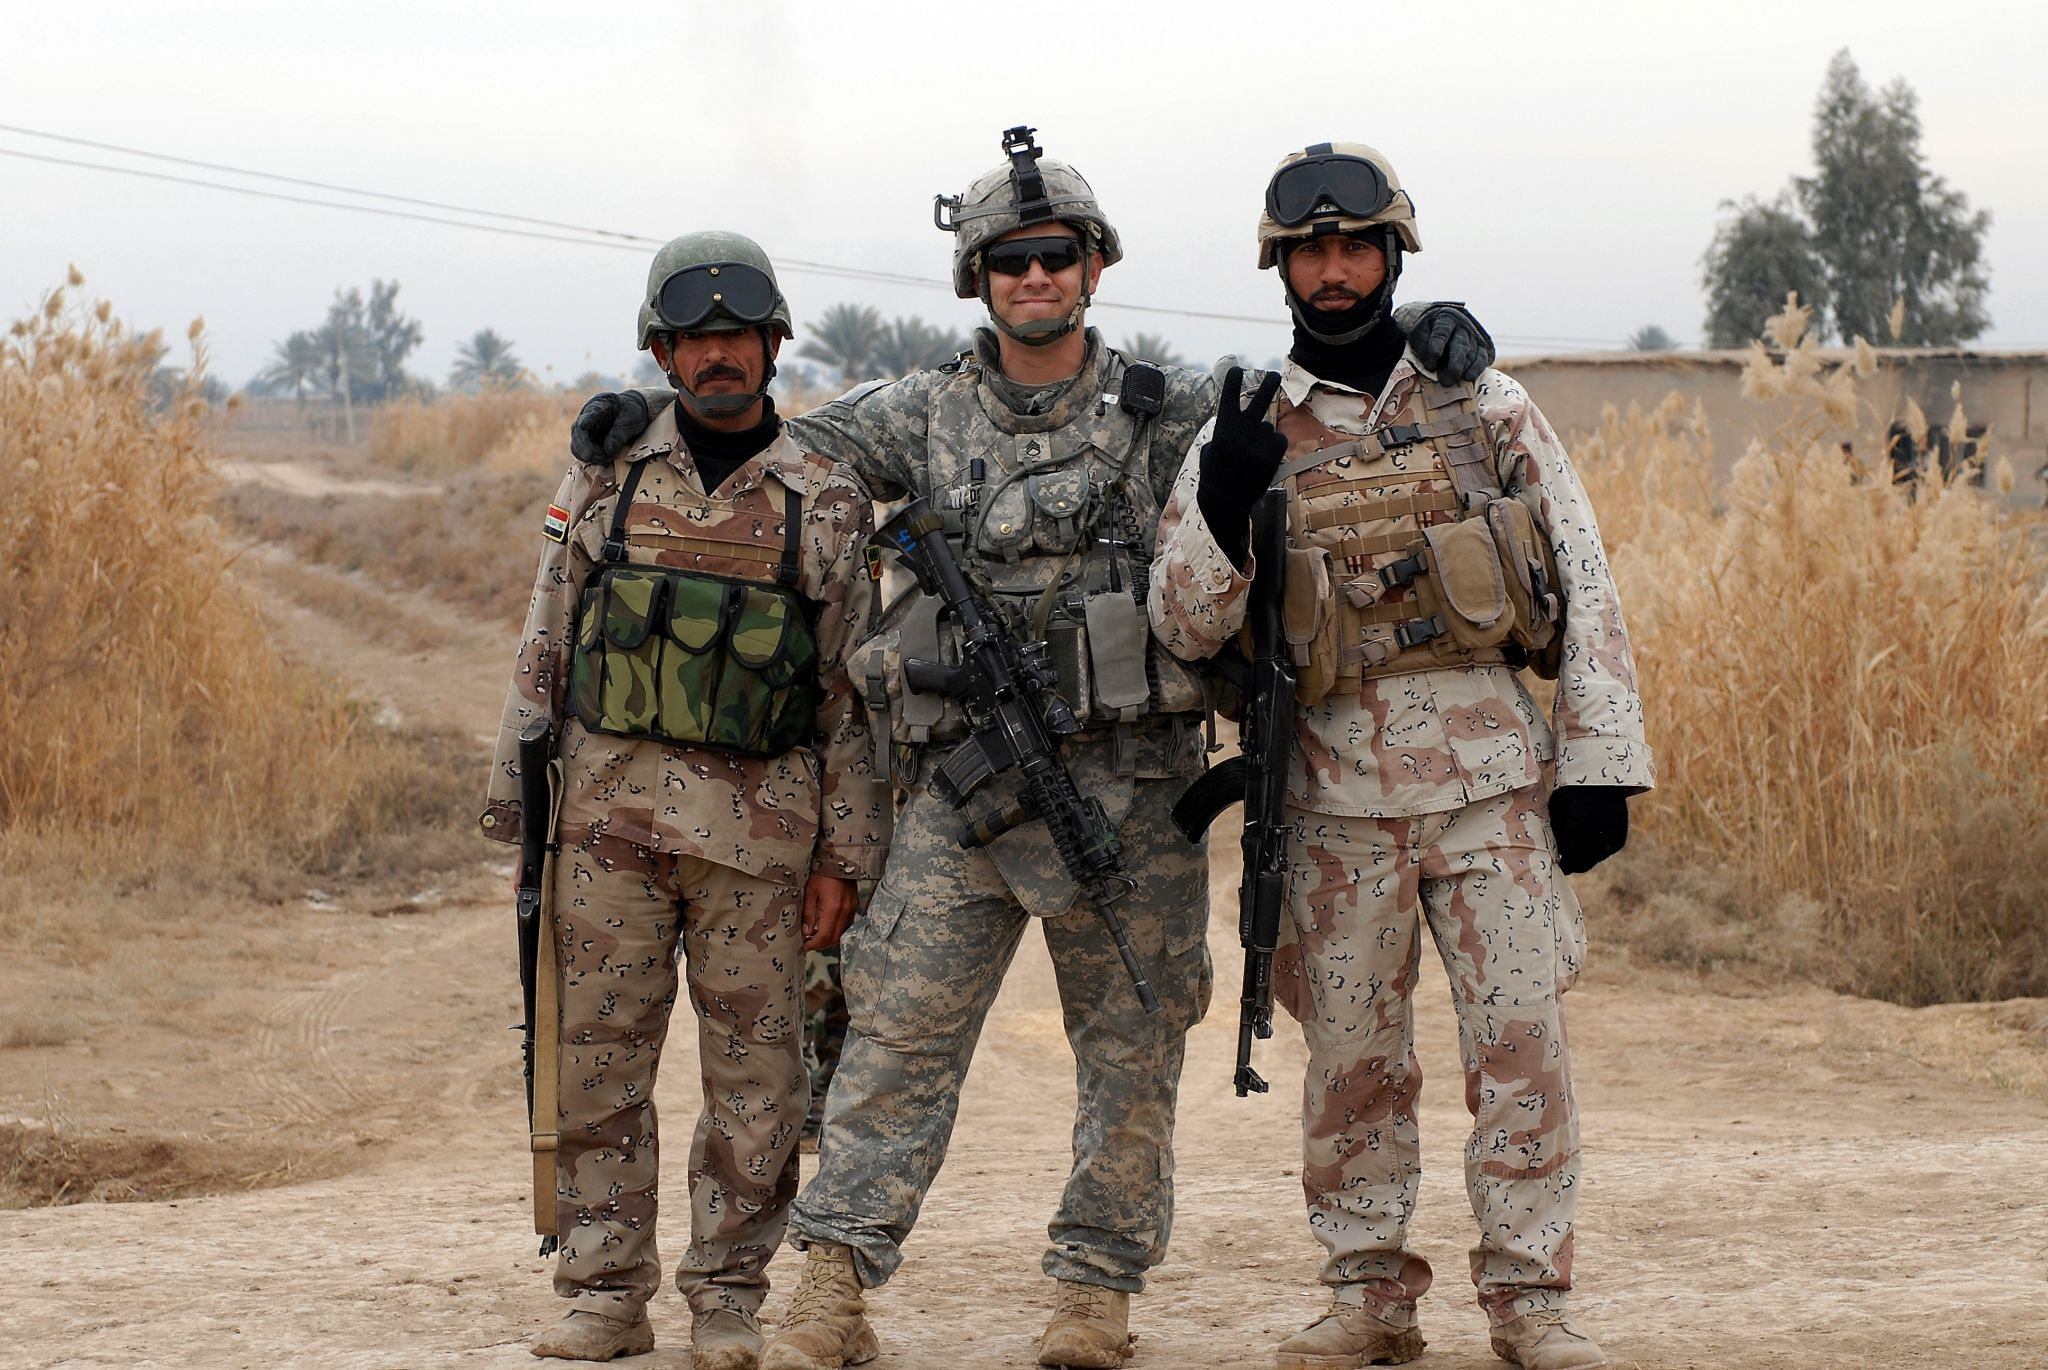 2048x1370 us army picture images | Iraqi army, Us army rangers, Army soldier